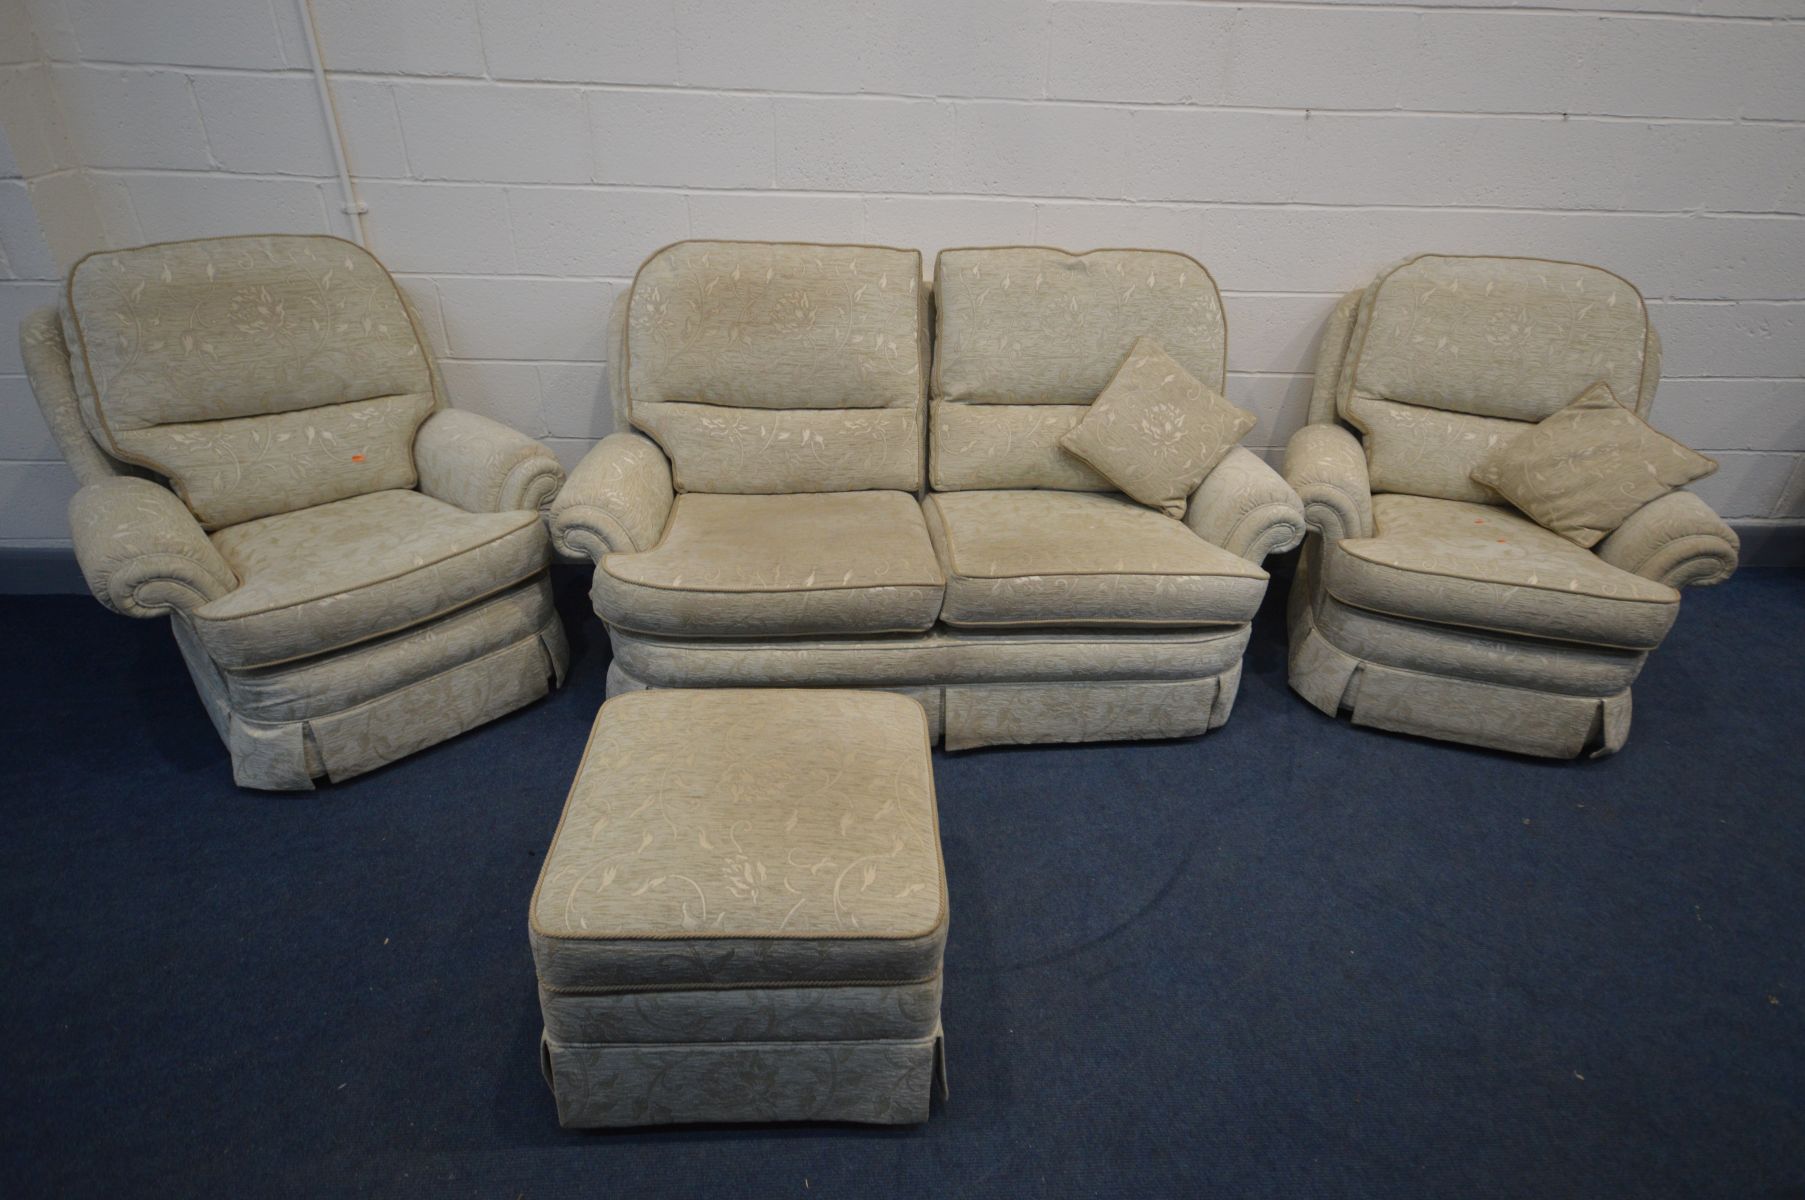 AN UPHOLSTERED THREE PIECE LOUNGE SUITE, comprising a two seater settee, pair of armchairs and a